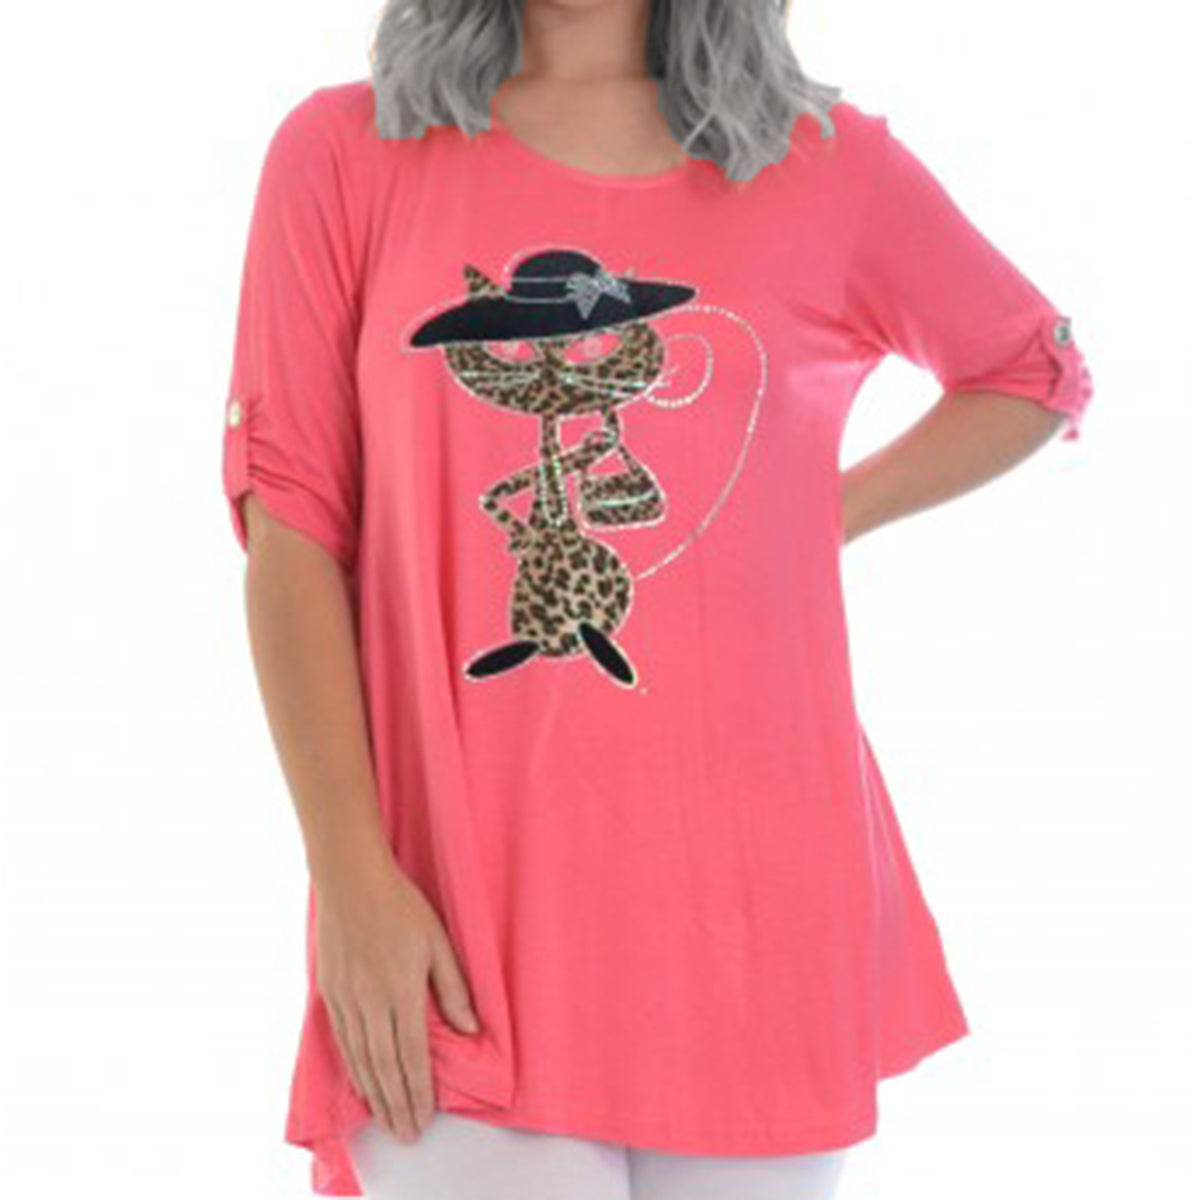 Loose fitting Button sleeve top with sparkly leopard print Cat in a Hat